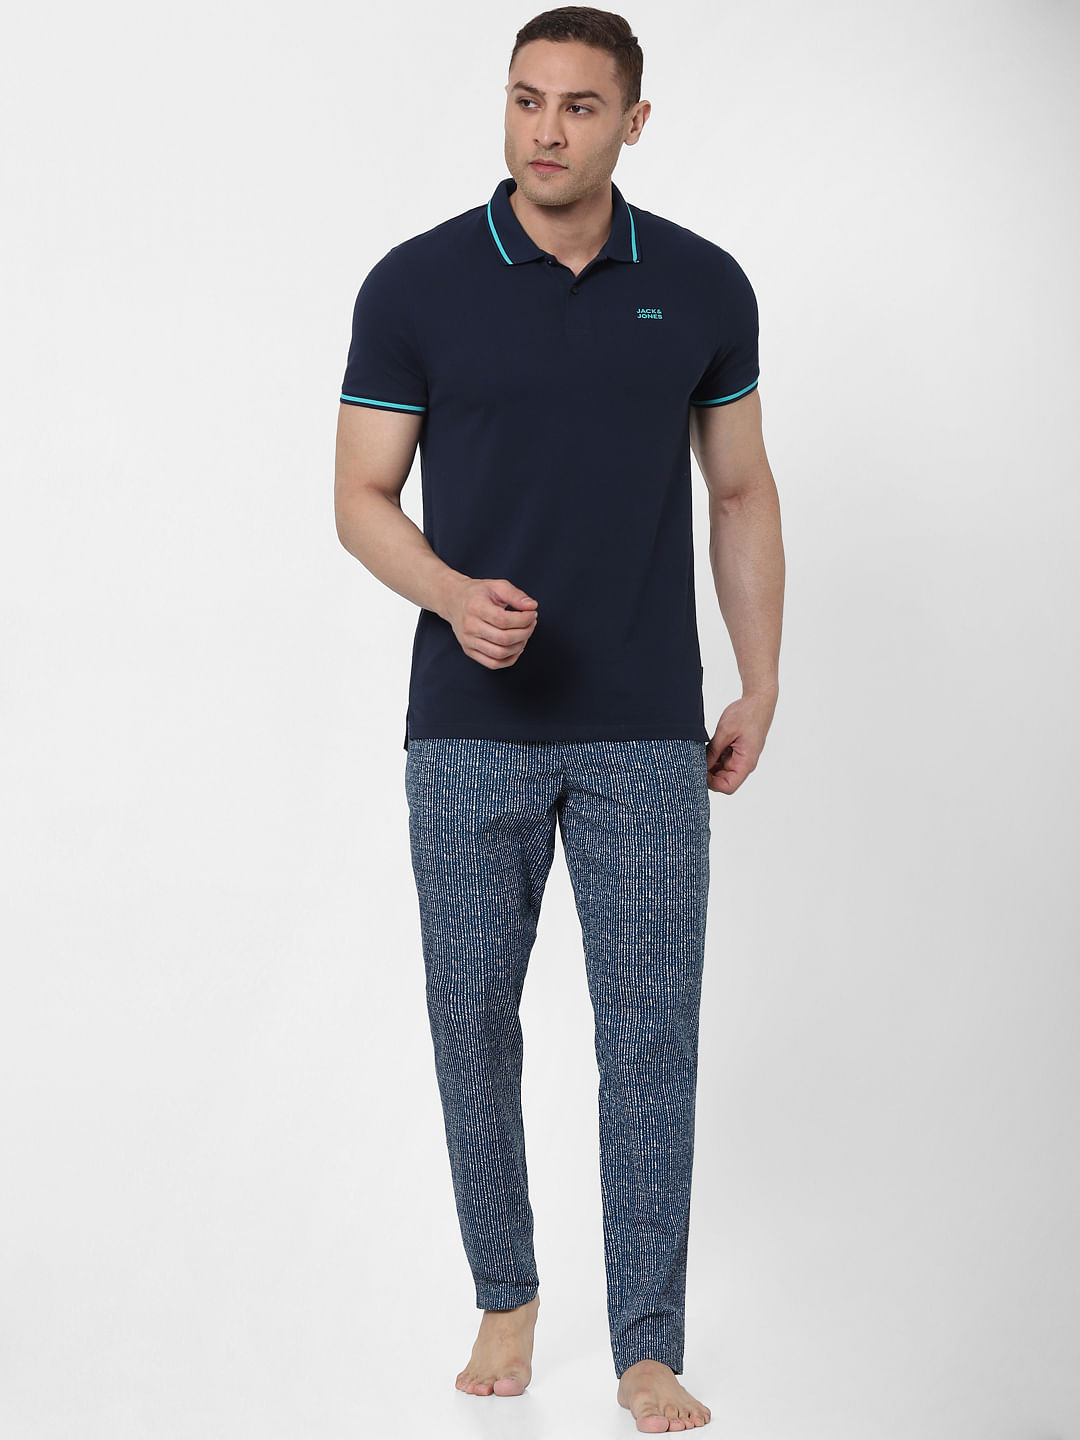 5 Styles of Nike Men's Trousers Comfy Enough for Sleep. Nike IN